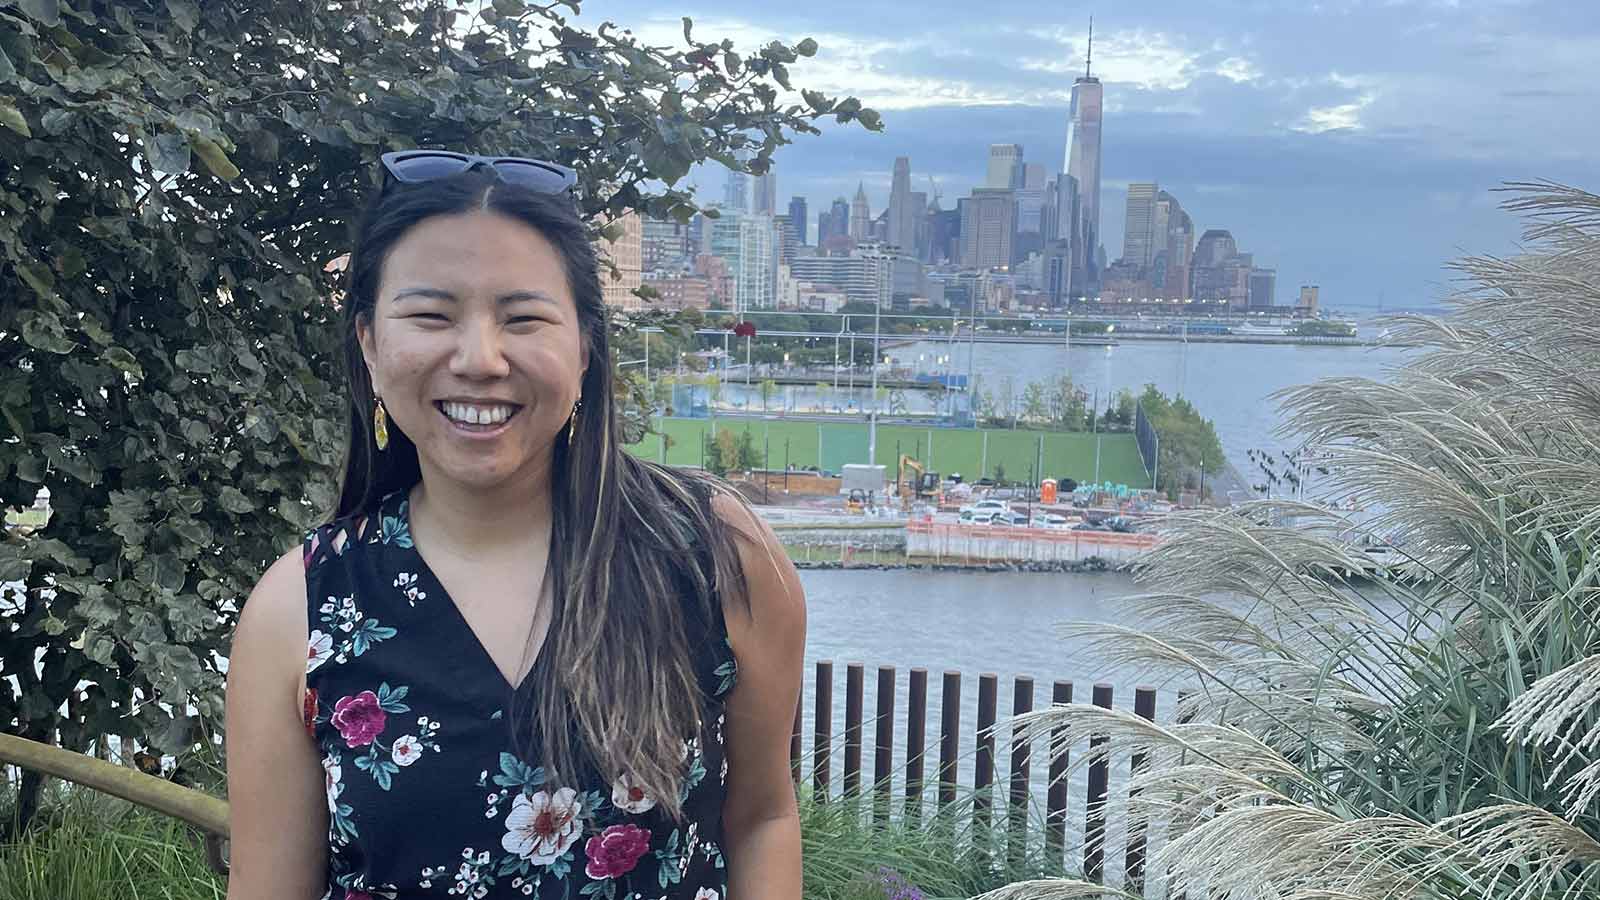 Chinese adoptee Katelyn Dixon smiles as she poses at a scenic overlook of the city